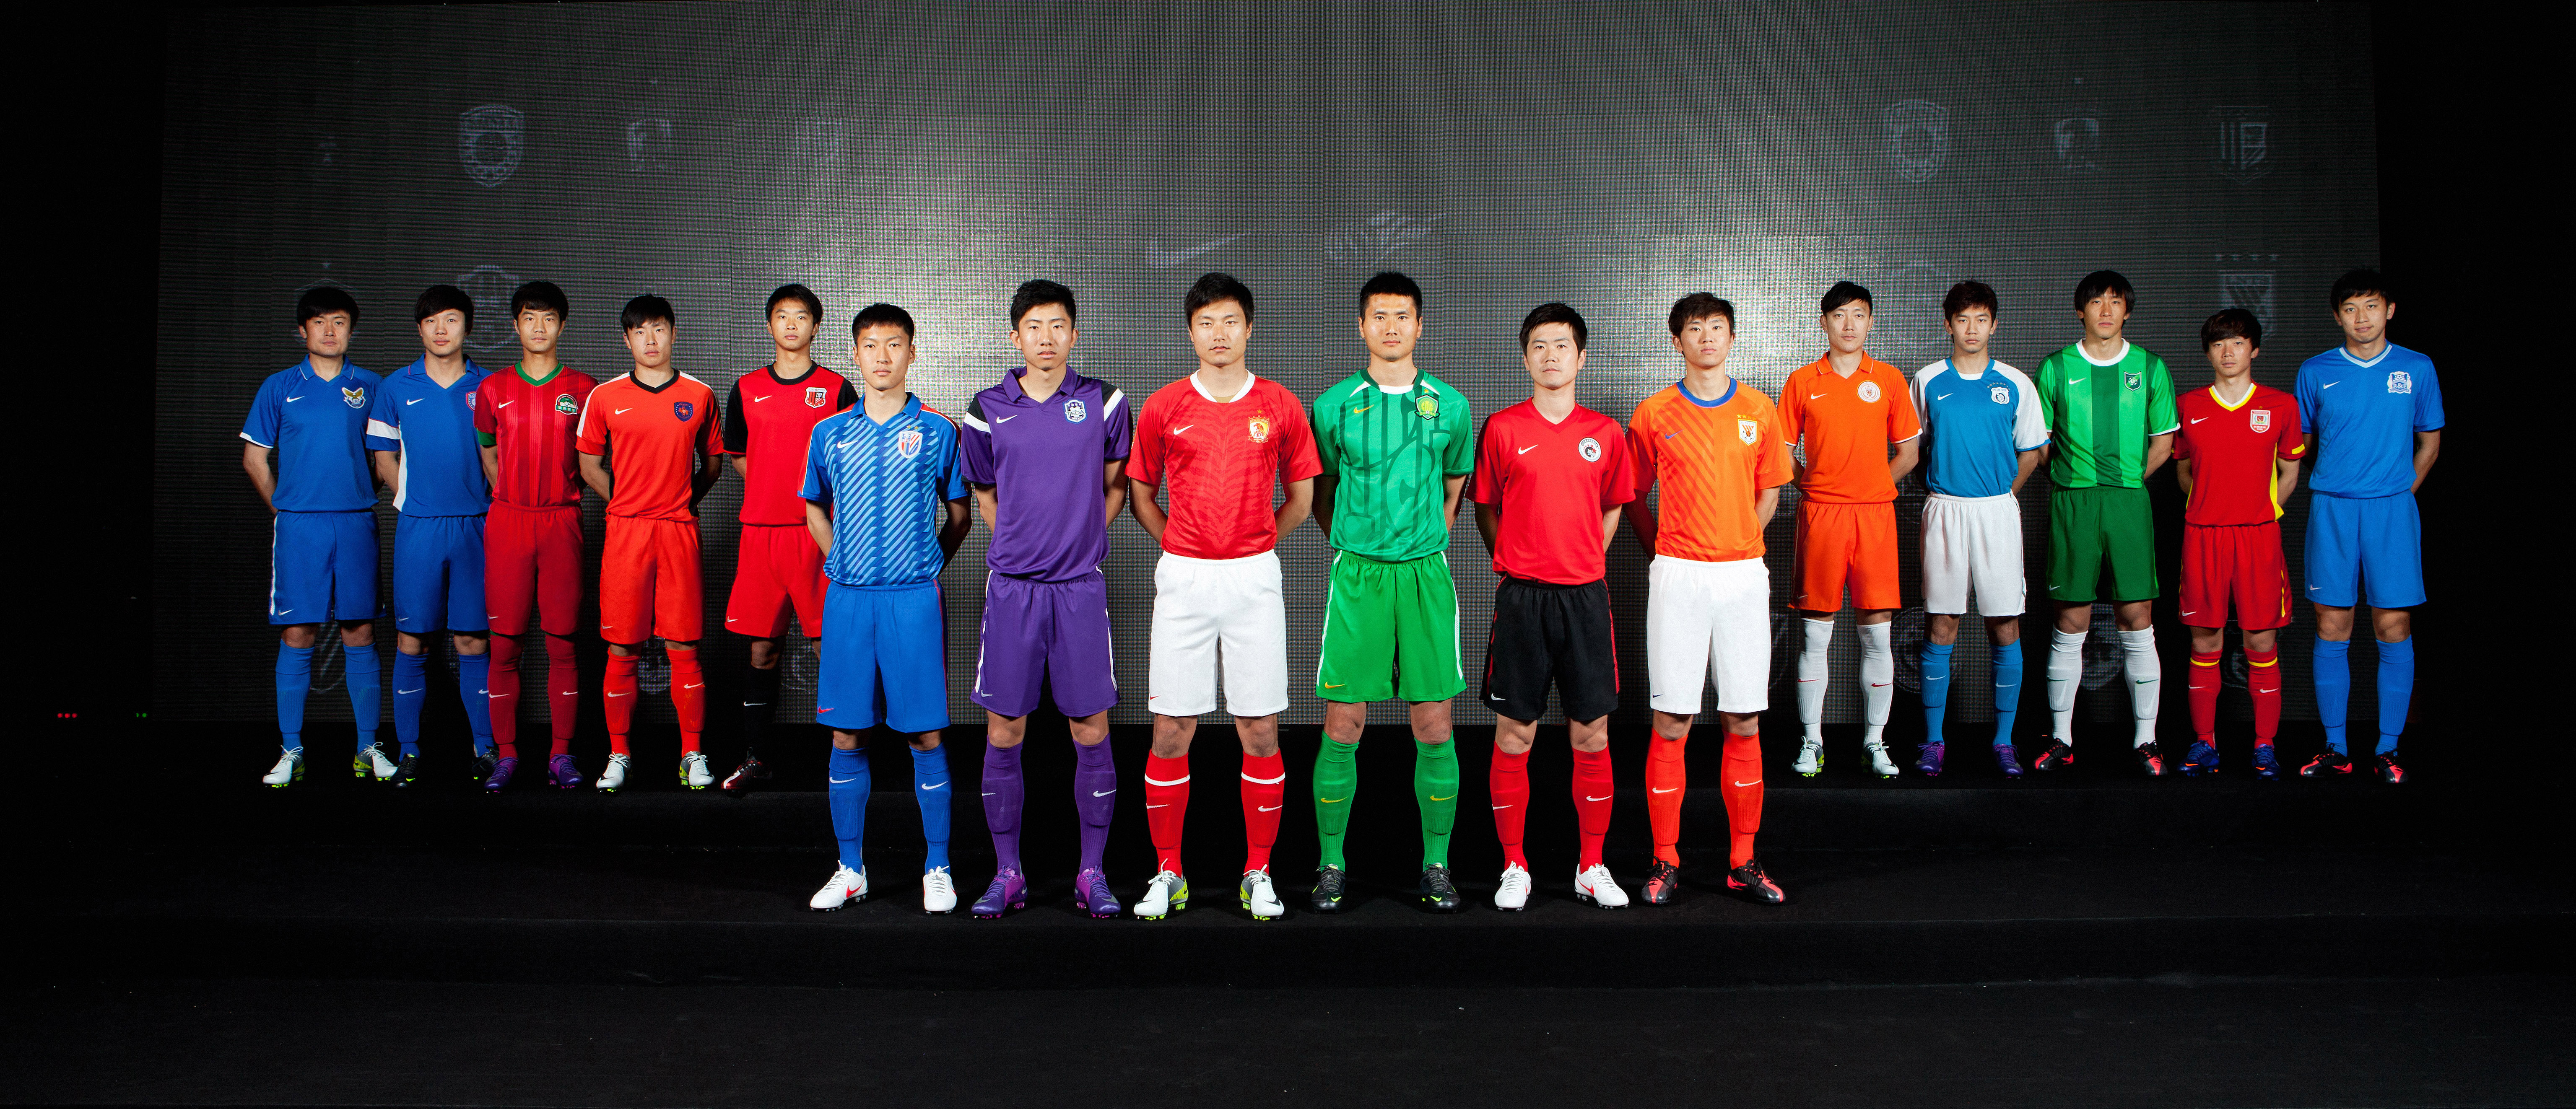 2012 Chinese Super League Teams Source: Nike